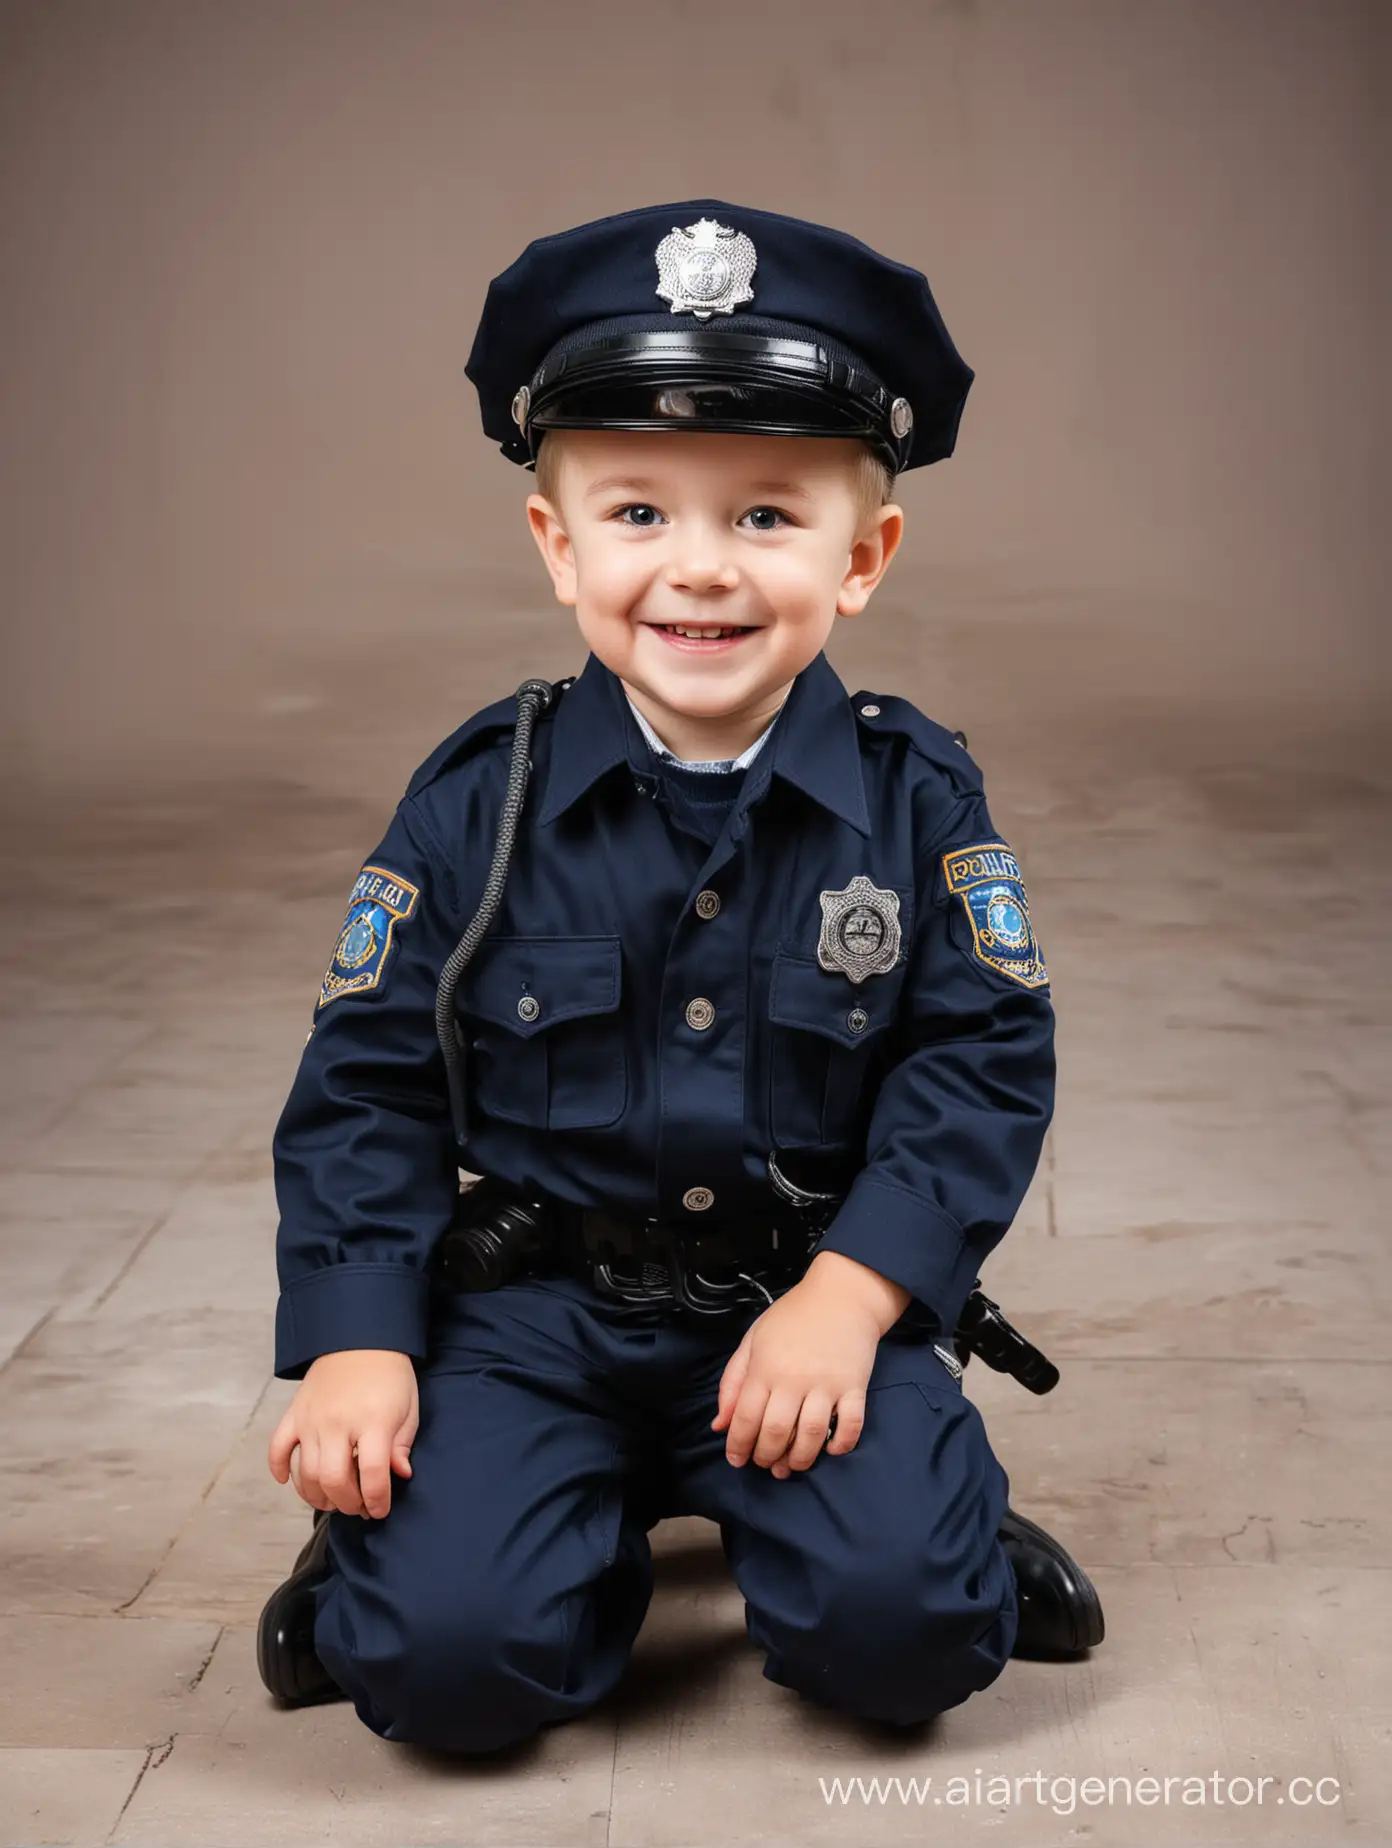 Joyful-Child-Playing-with-Toy-Cars-in-Police-Costume